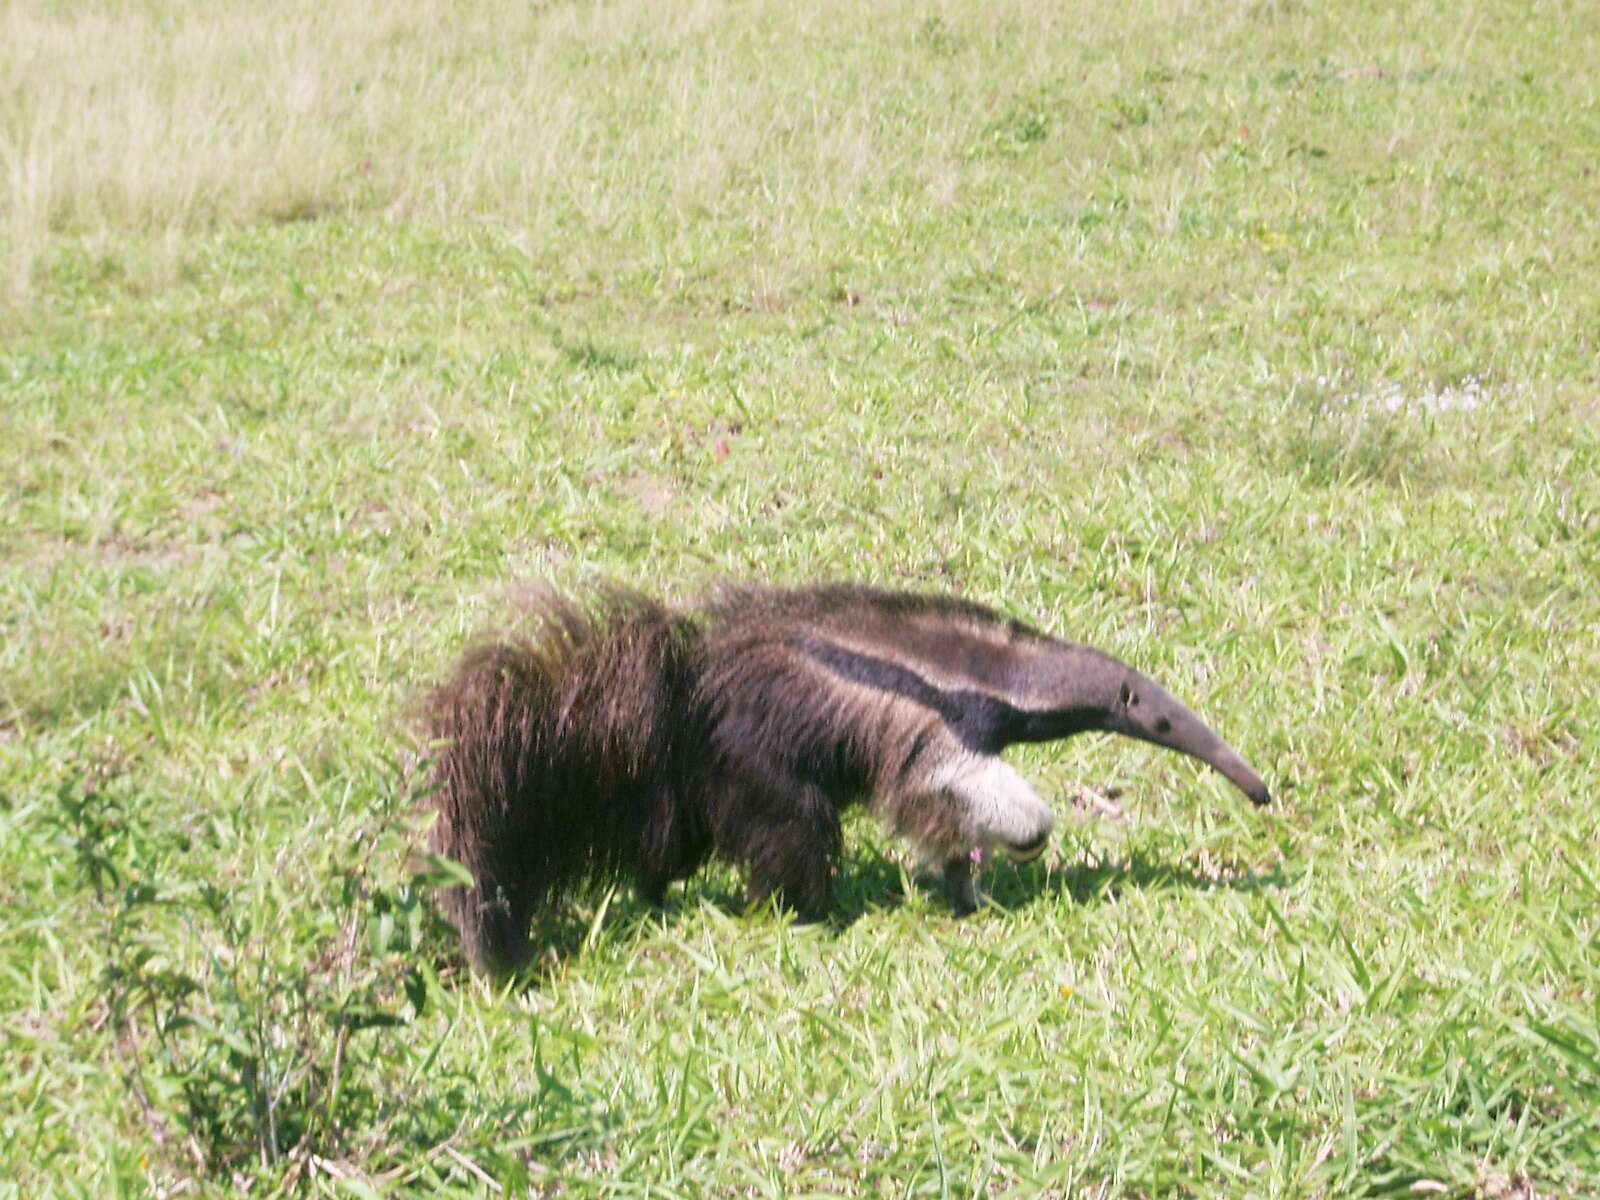 Image of anteater